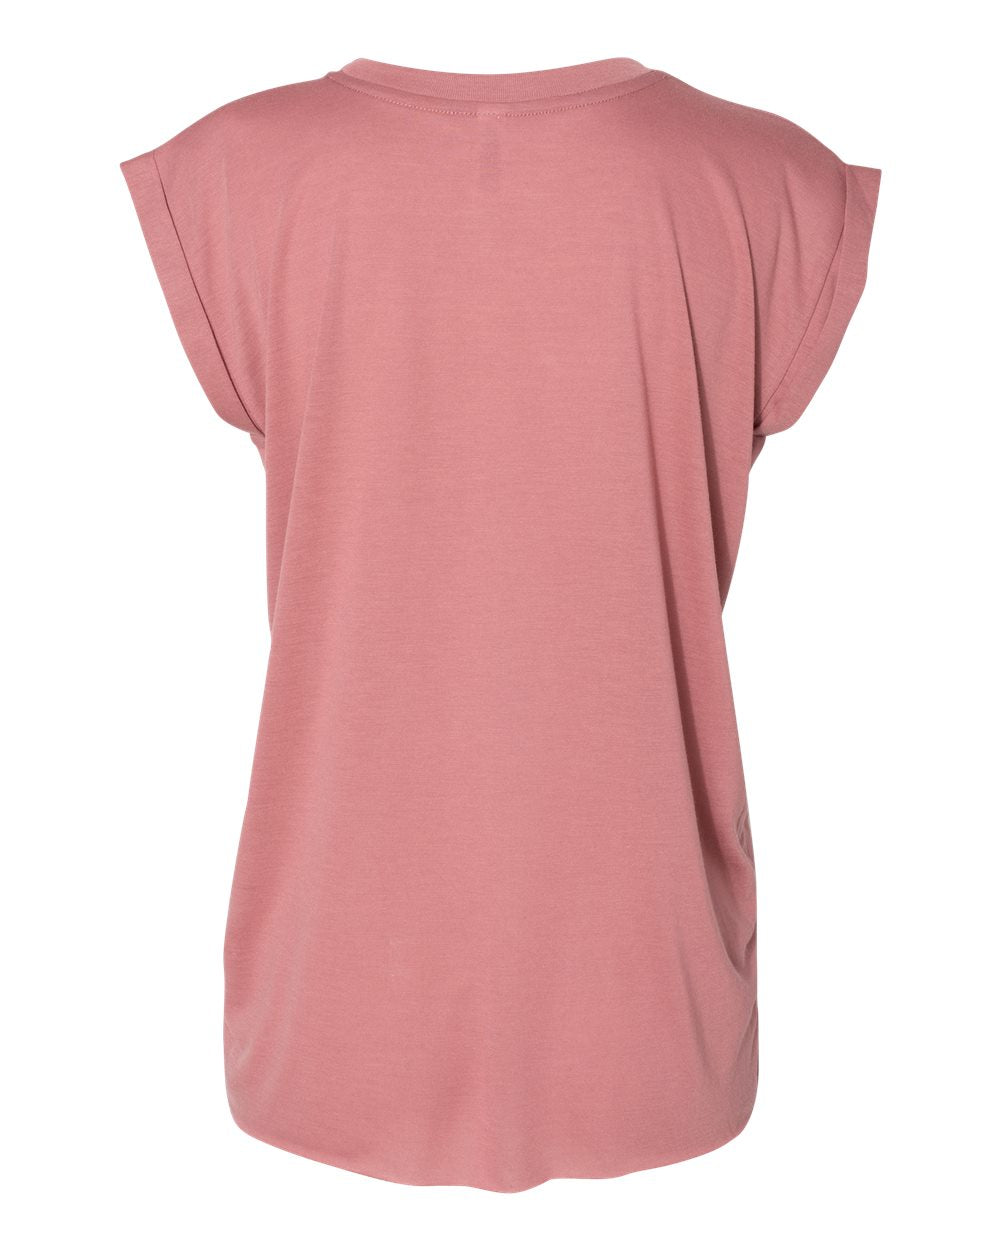 BELLA + CANVAS Women’s Flowy Rolled Cuffs Muscle Tee 8804 #color_Mauve